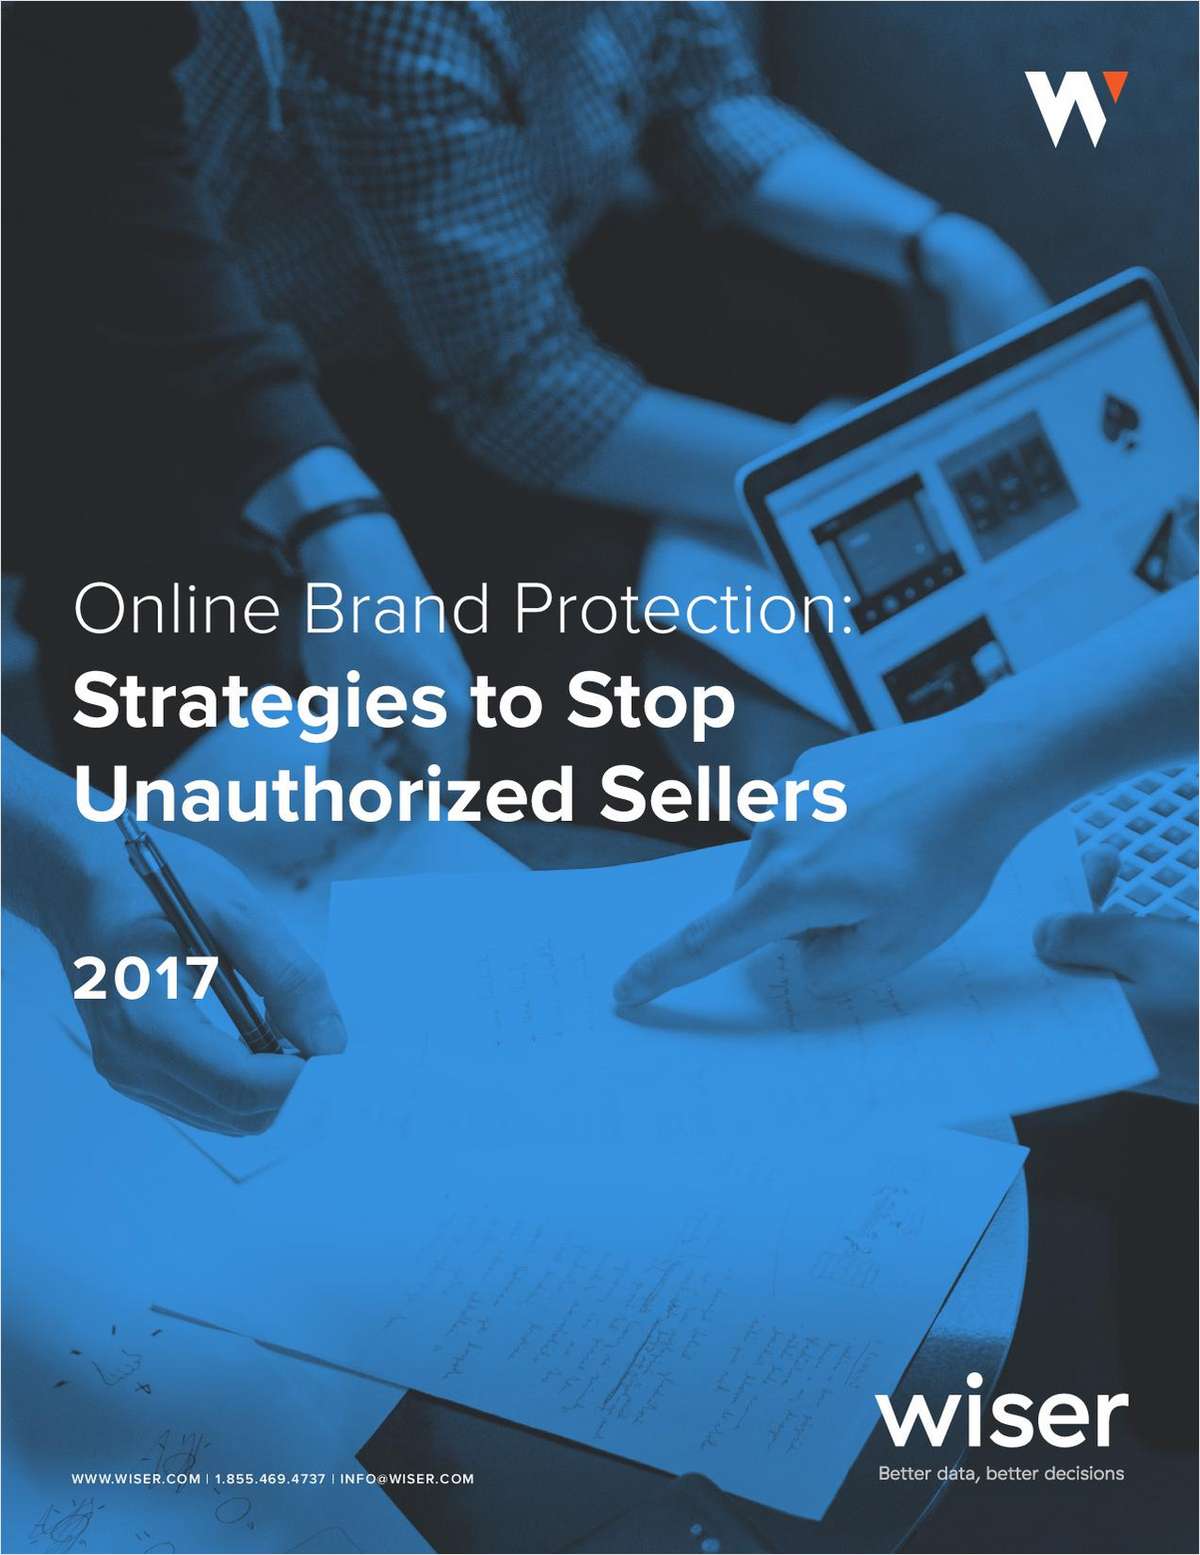 Brand Protection: Strategies to Stop Unauthorized Sellers